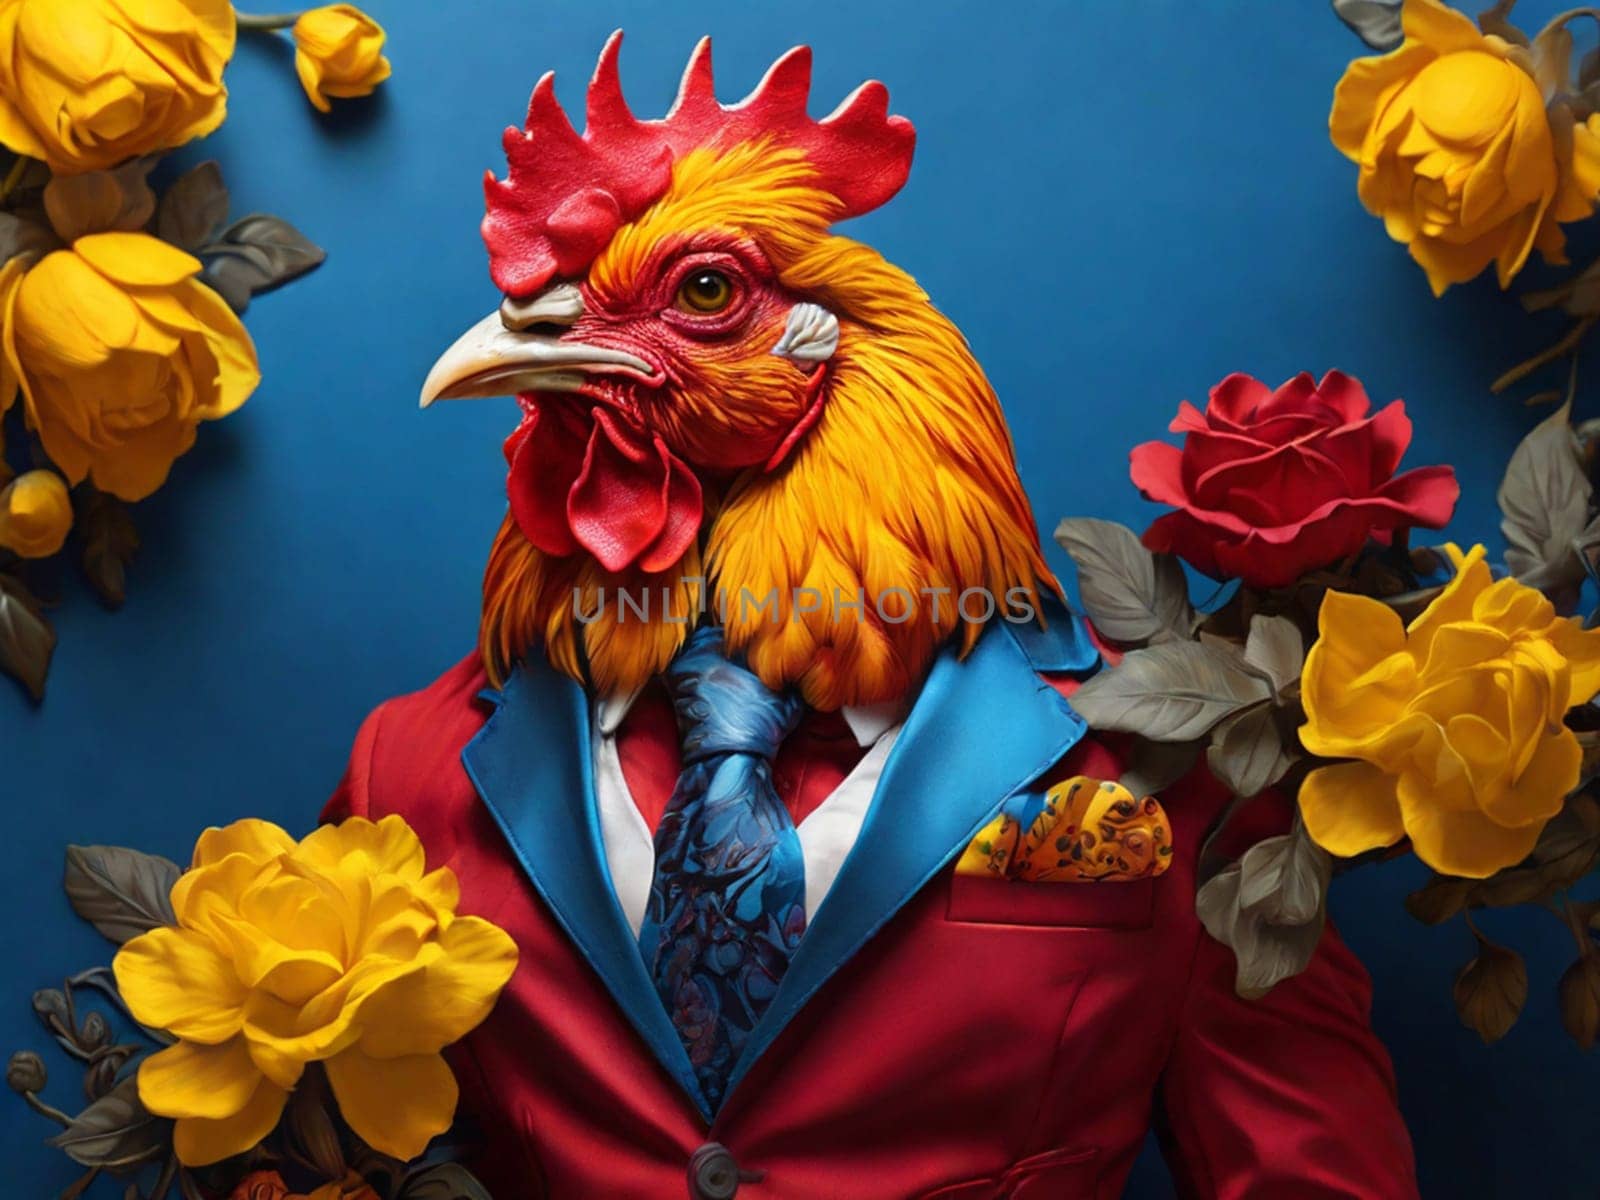 A funny rooster with blue feathers in a multi-colored jacket, on a blue background with flowers. design for printing t-shirts, mugs, covers, etc